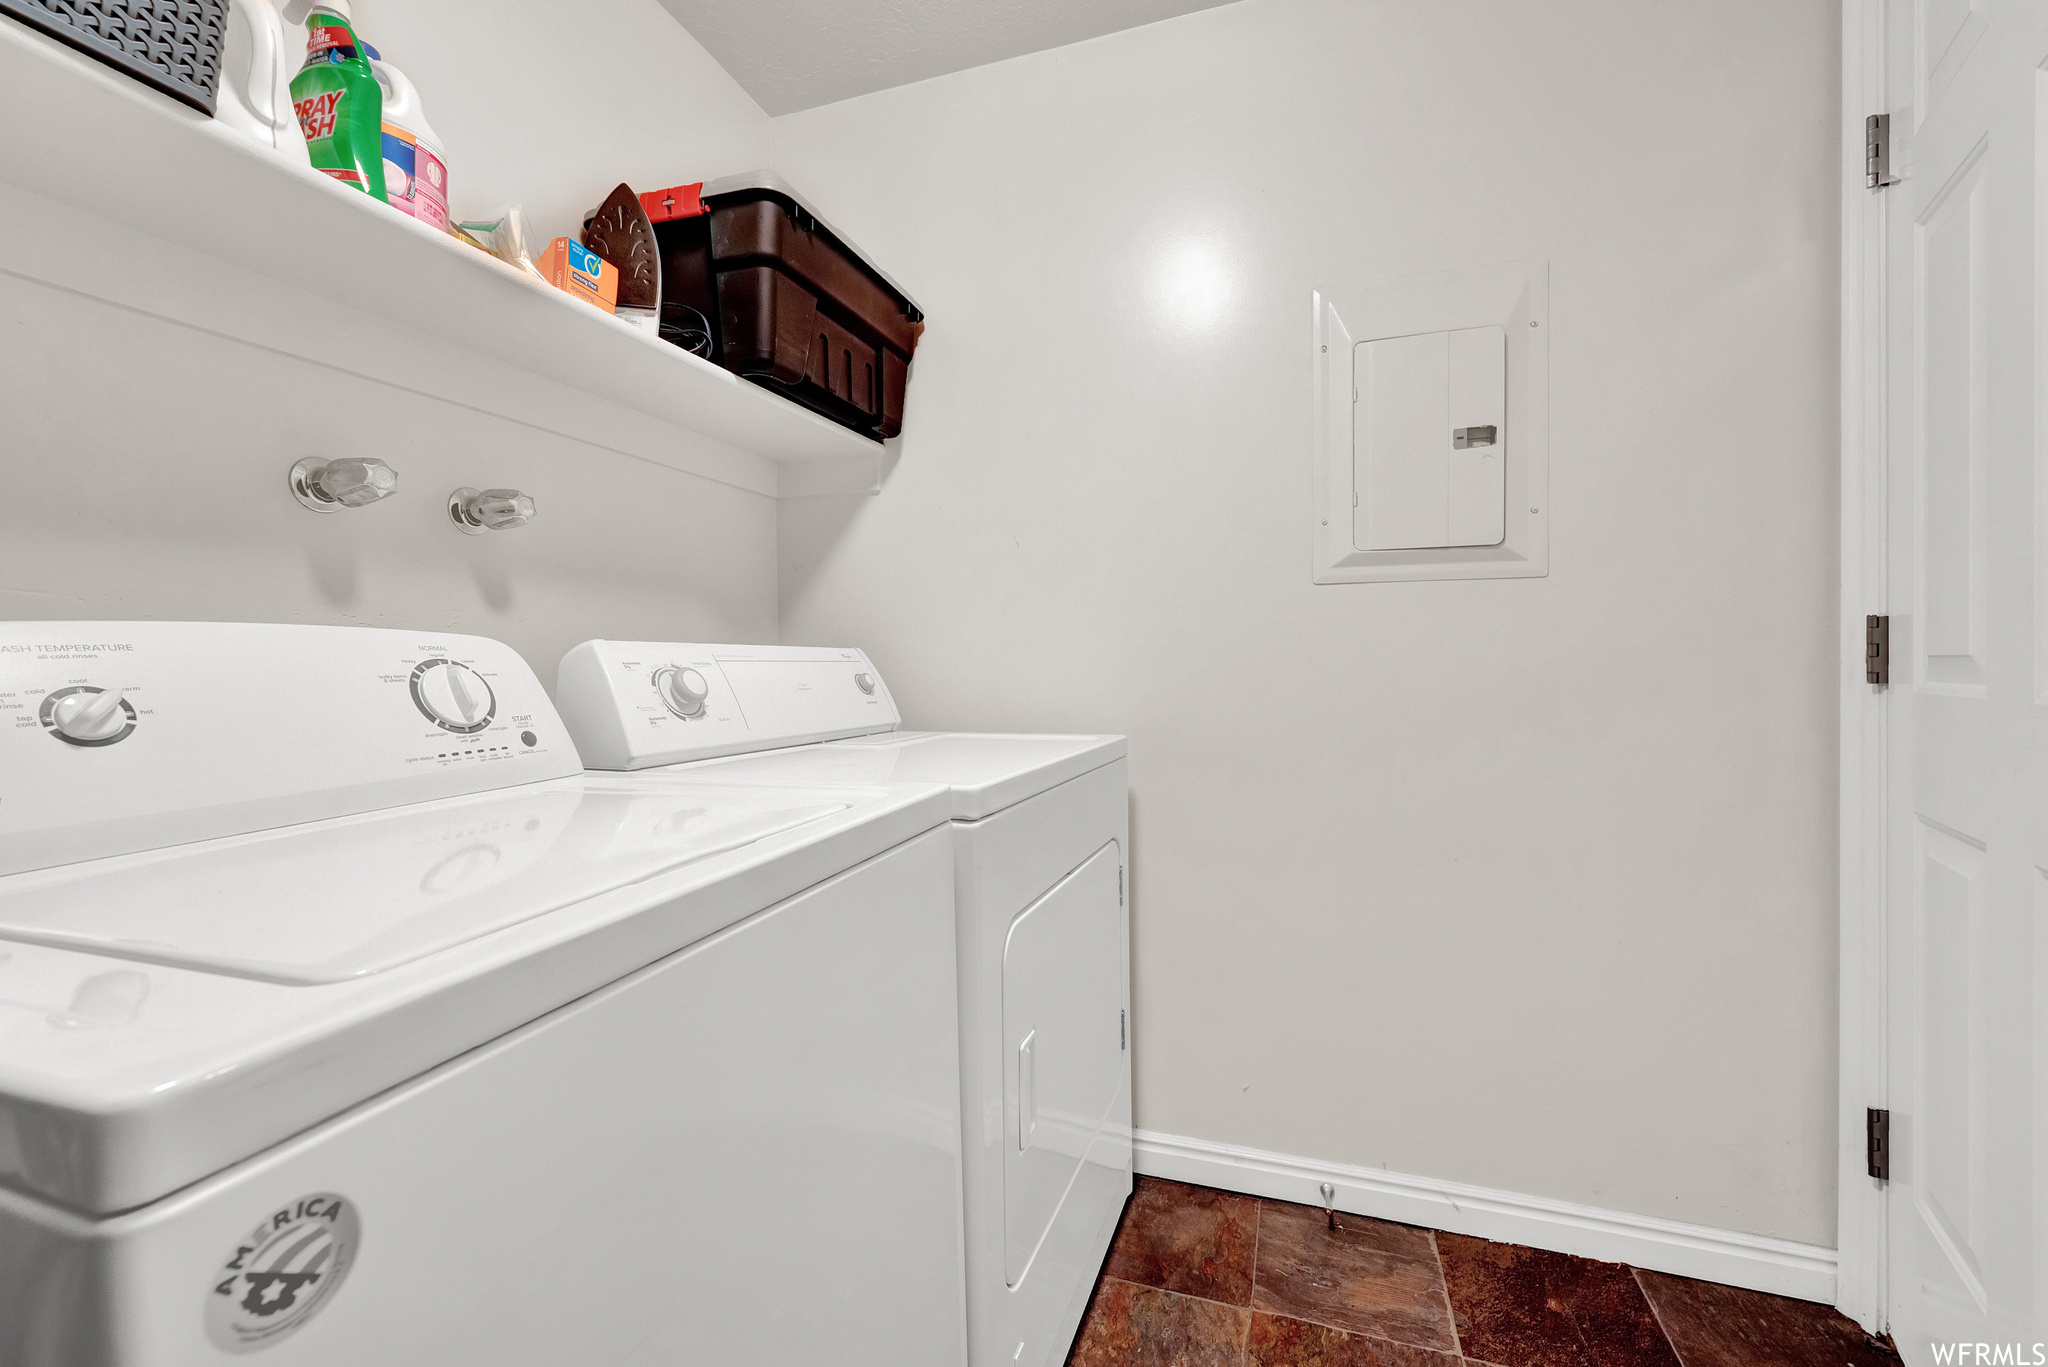 Level 2 Laundry Room: Including dryer and new washing machine